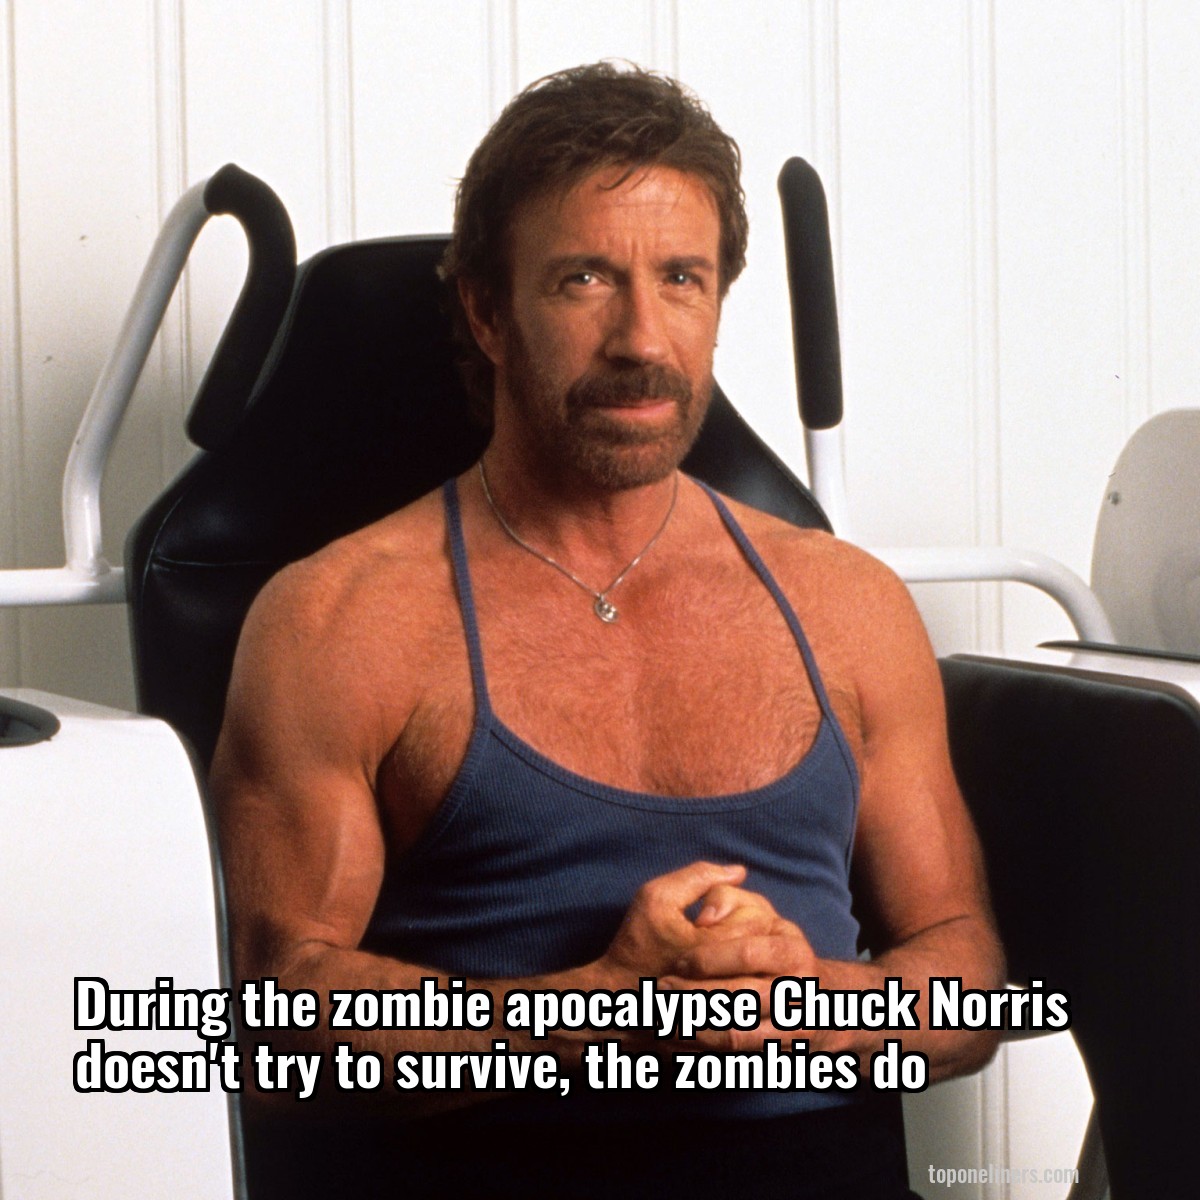 During the zombie apocalypse Chuck Norris doesn't try to survive, the zombies do